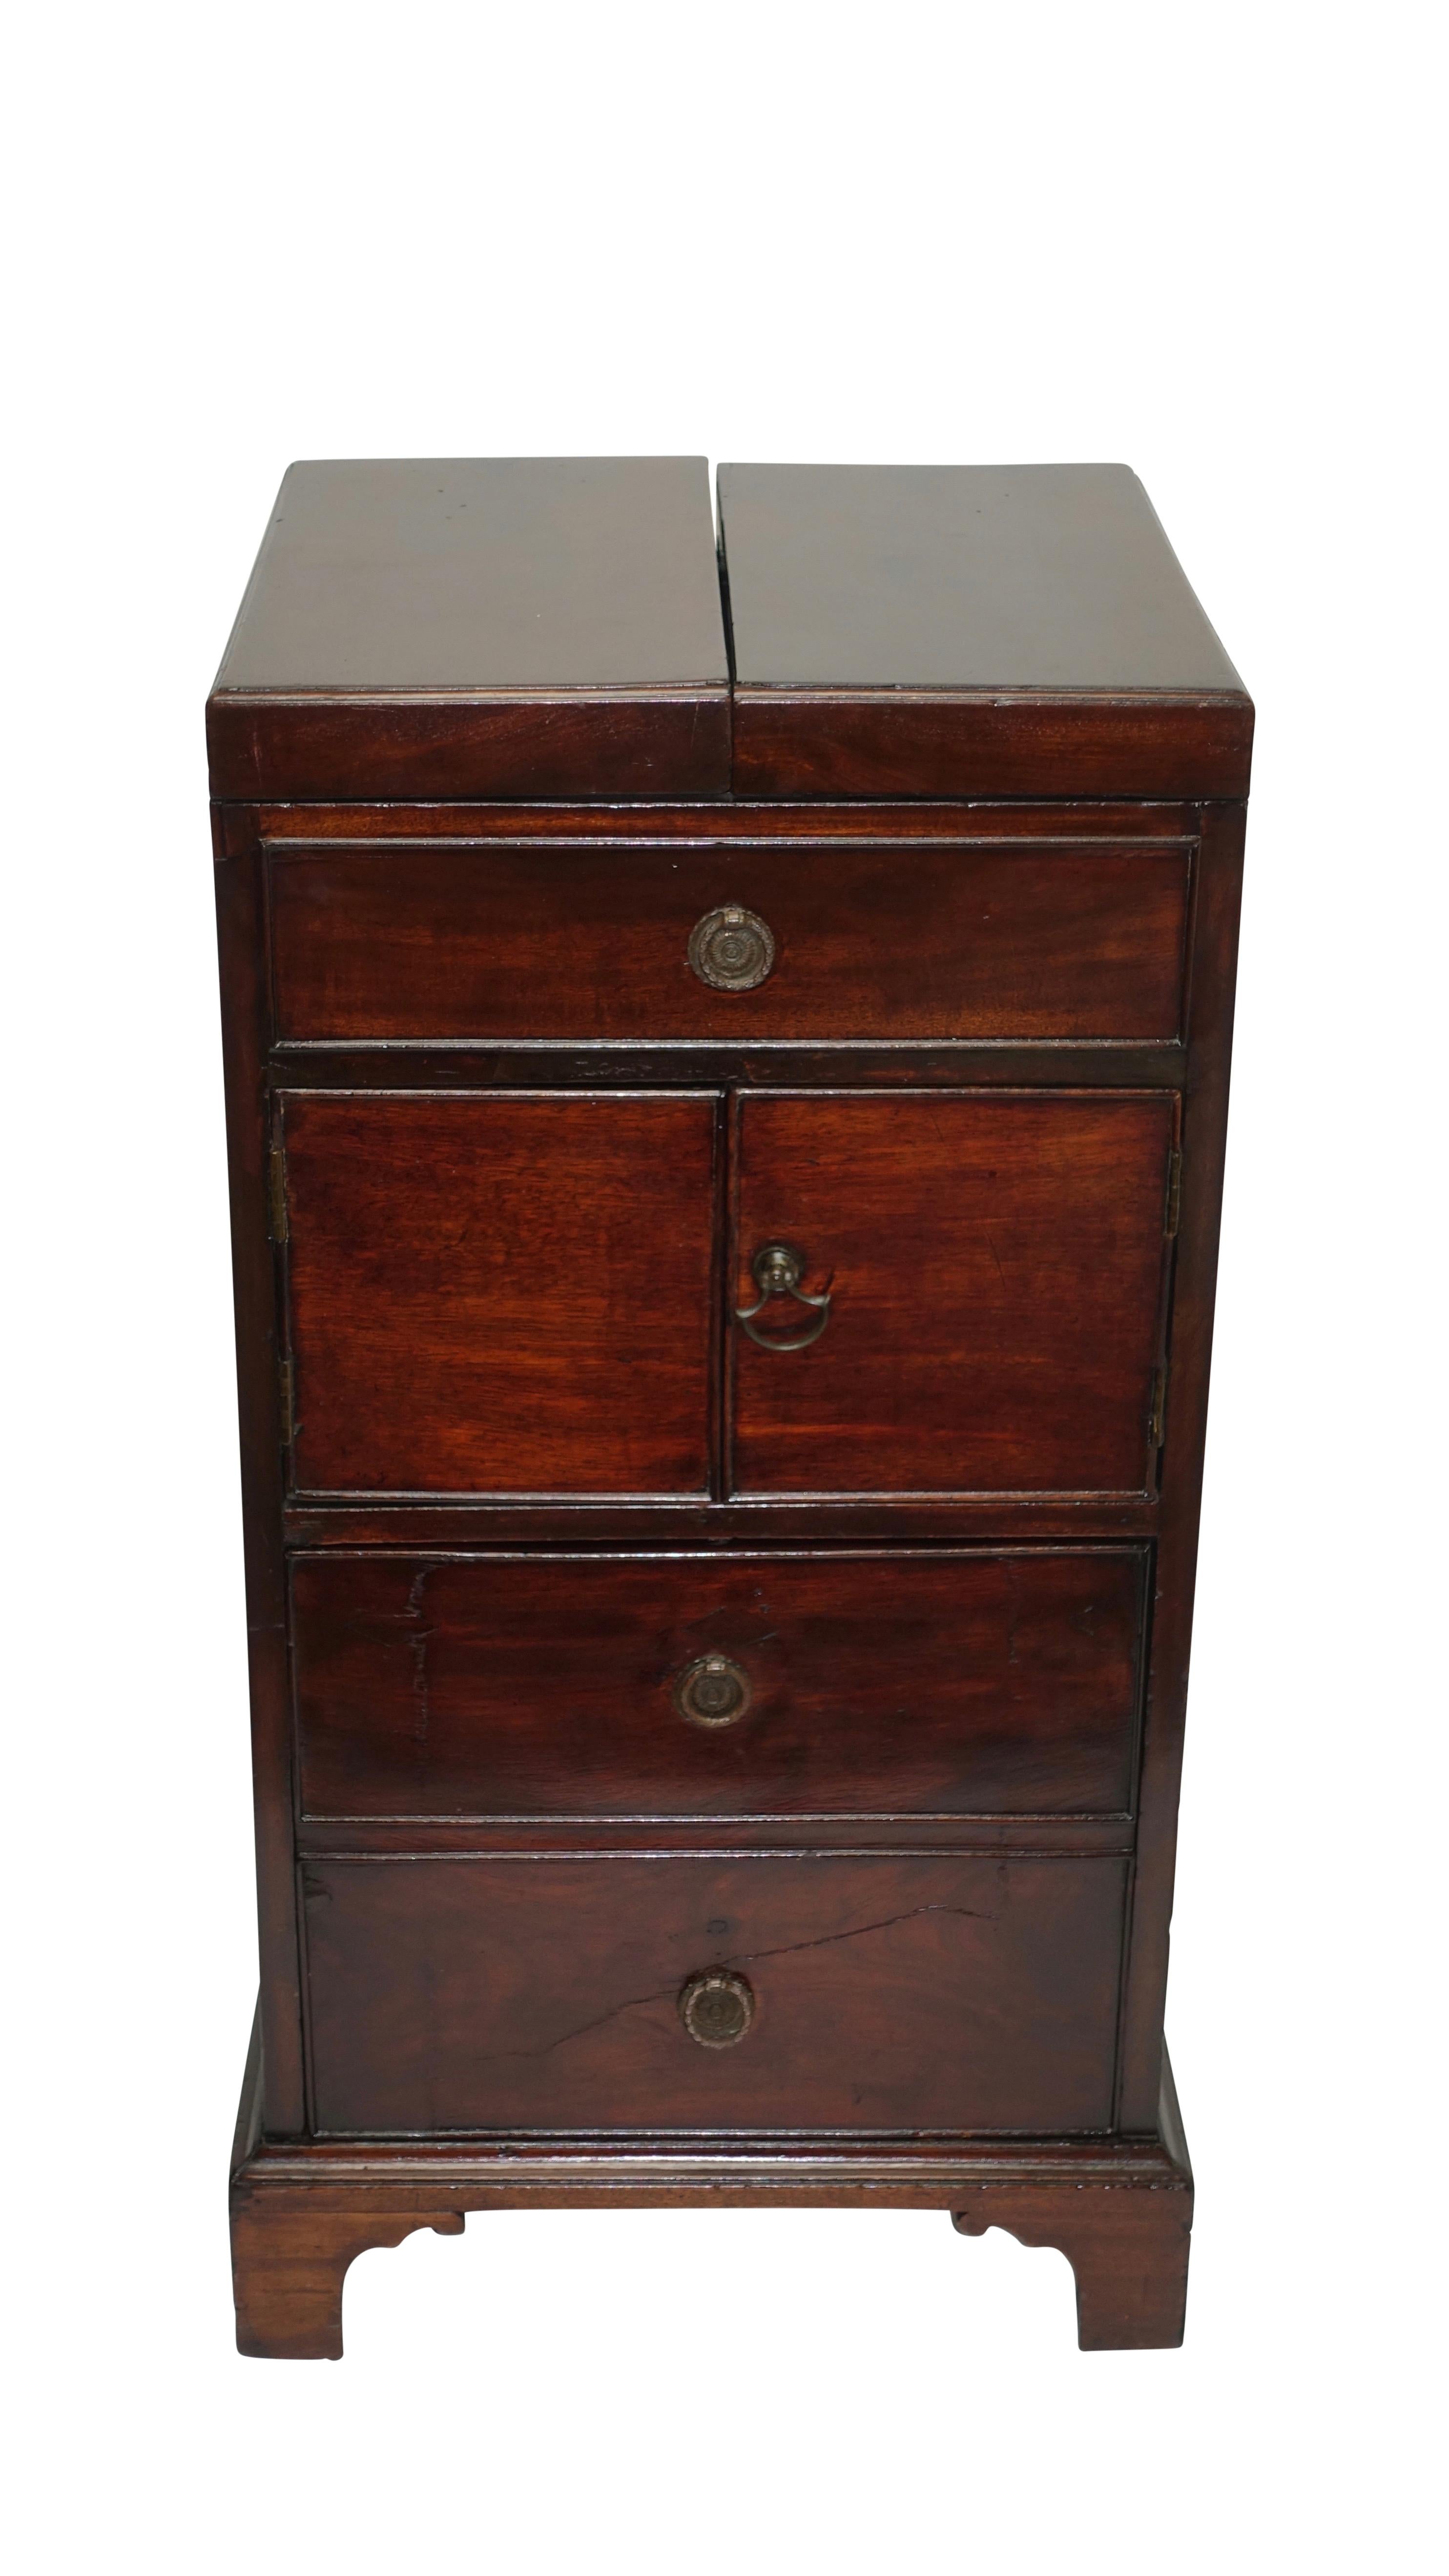 Georgian mahogany washstand with flip open top, the inside fitted with lift up above a false drawer, a pair of doors open to reveal cabinet space above a deep drawer, standing on bracket feet with brass handles on either side. Showing signs of early